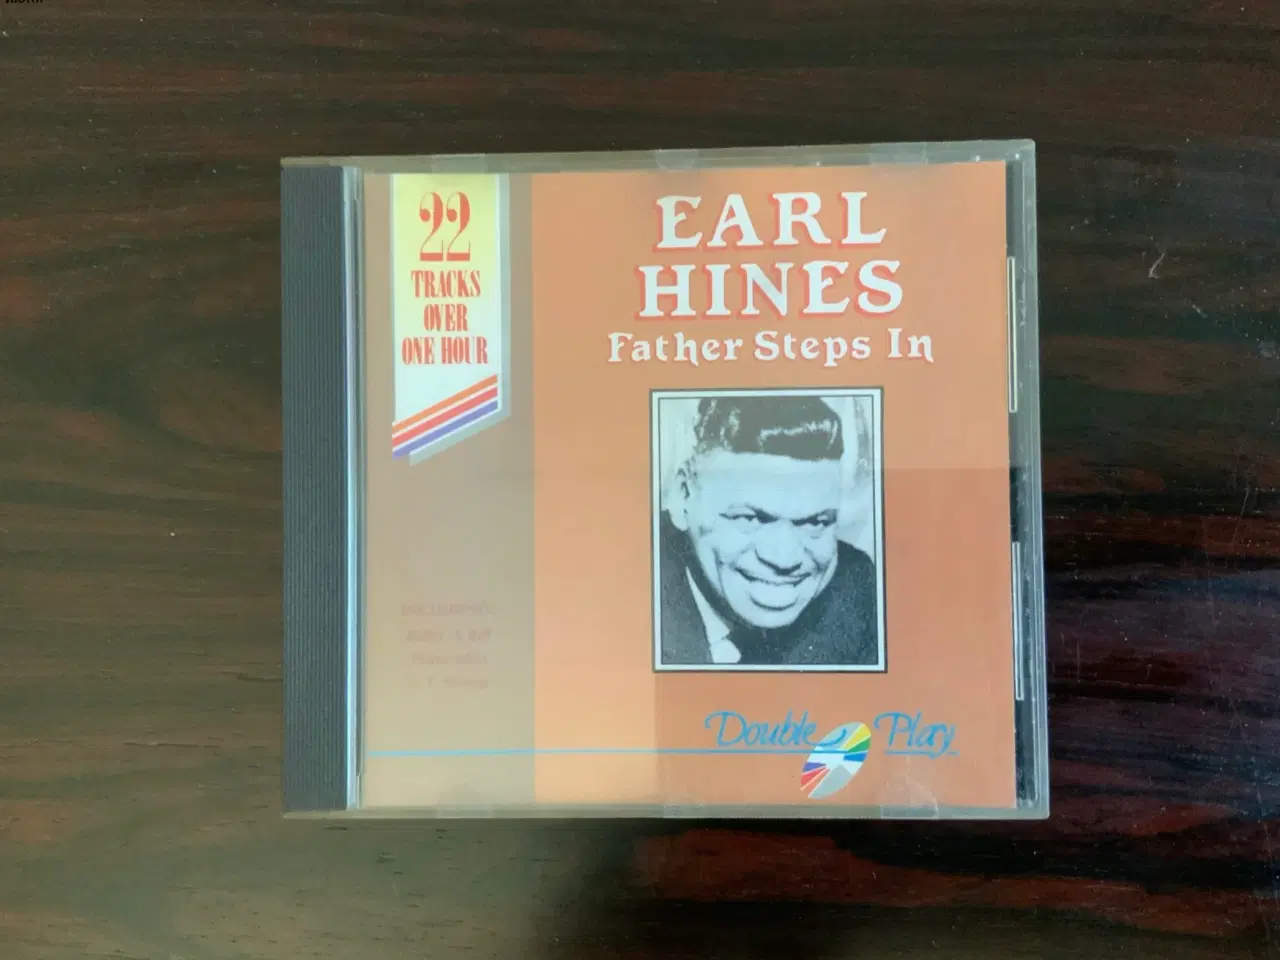 Billede 1 - Earl Hines - Father Steps In